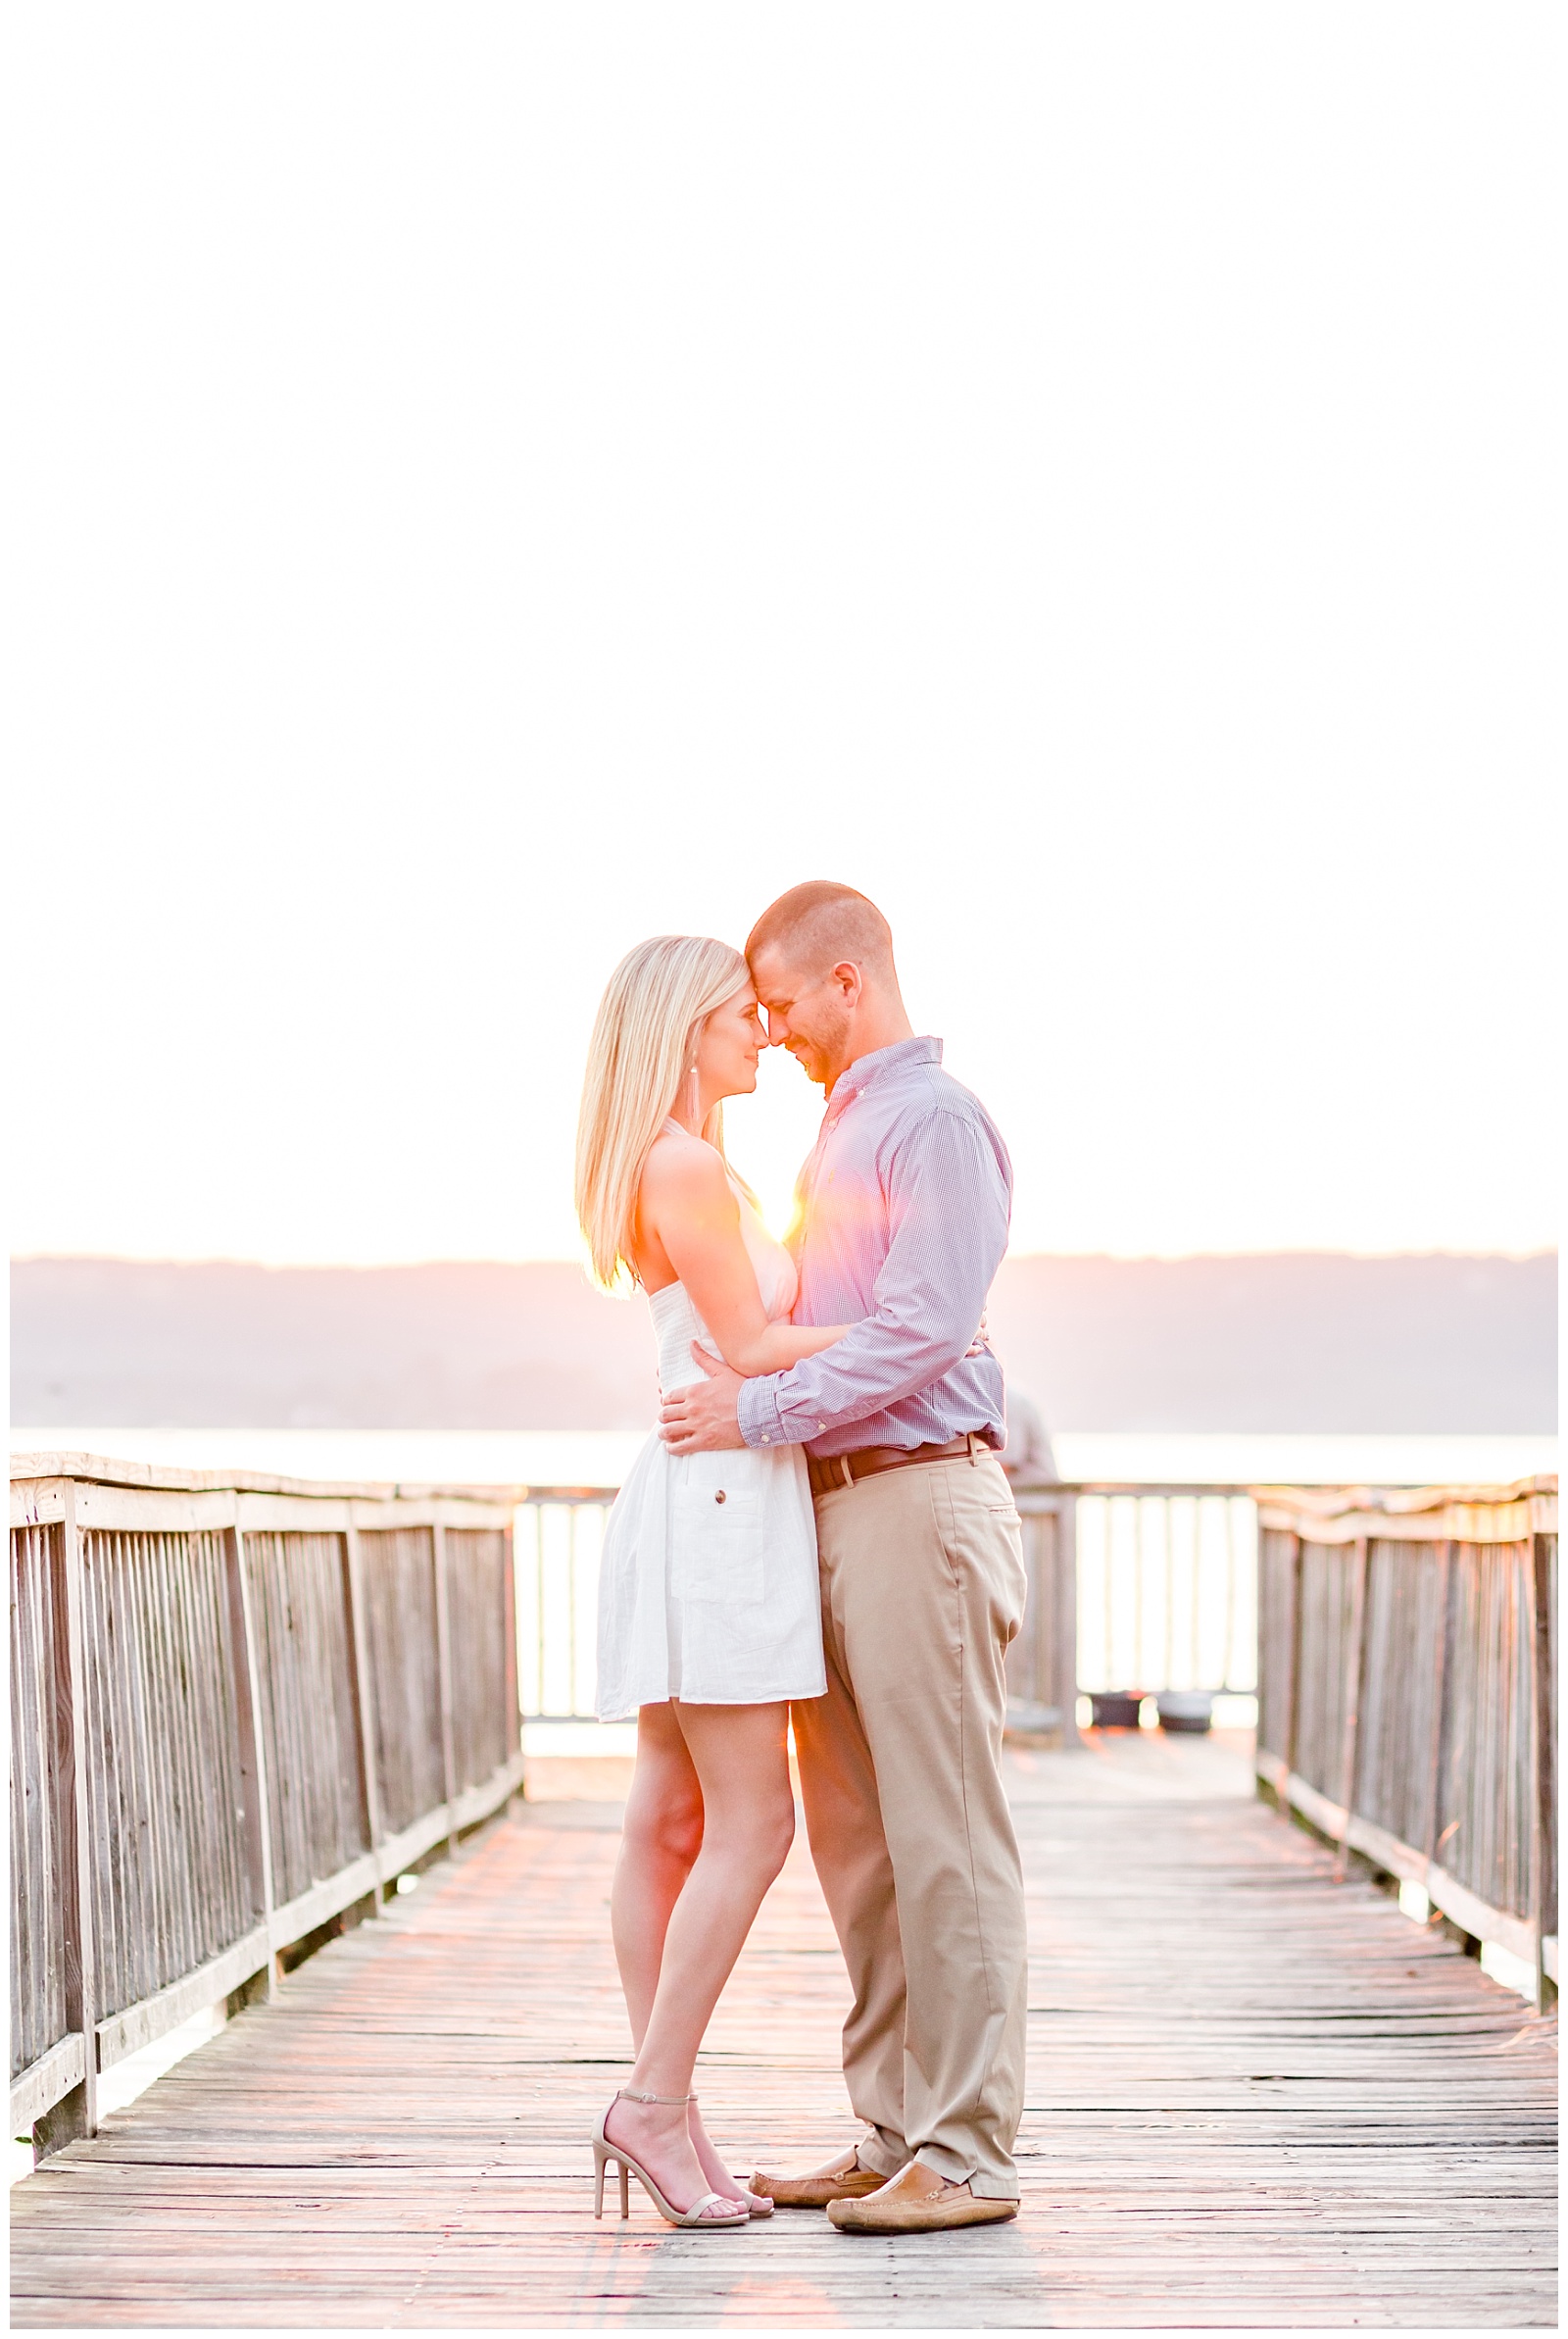 Lake engagement picture on dock at sunset